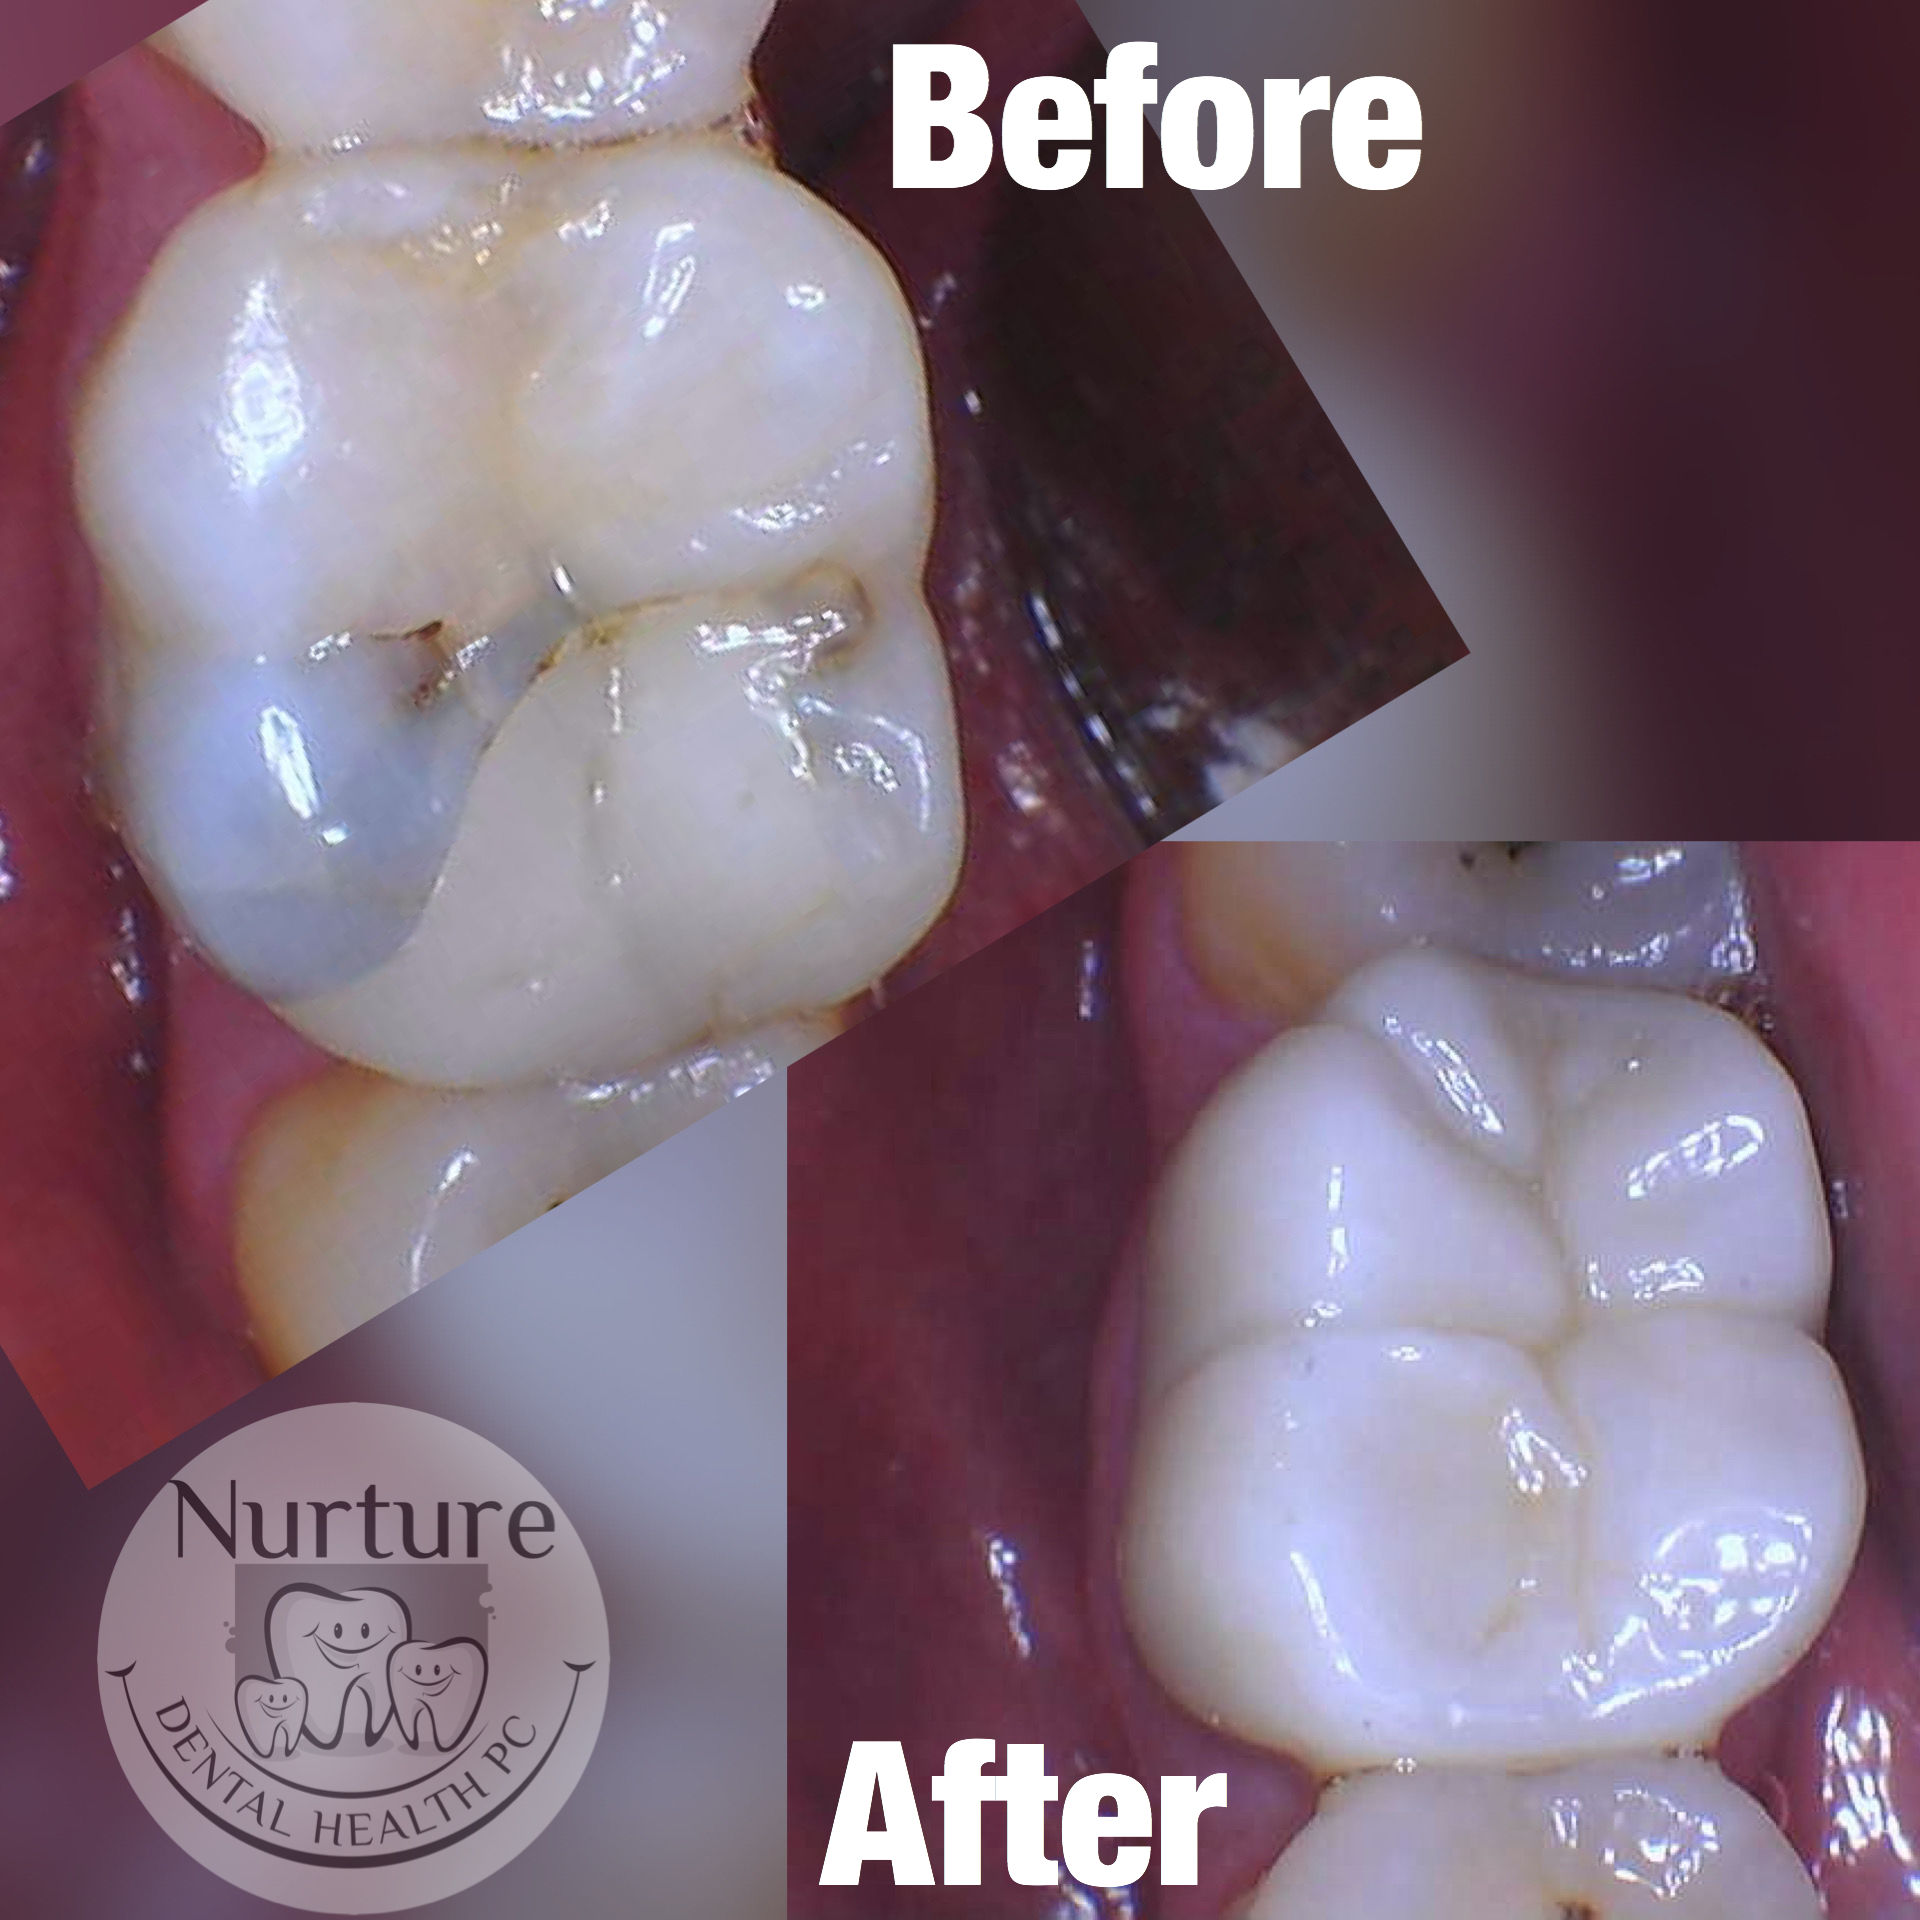 Before and after crowns for teeth.